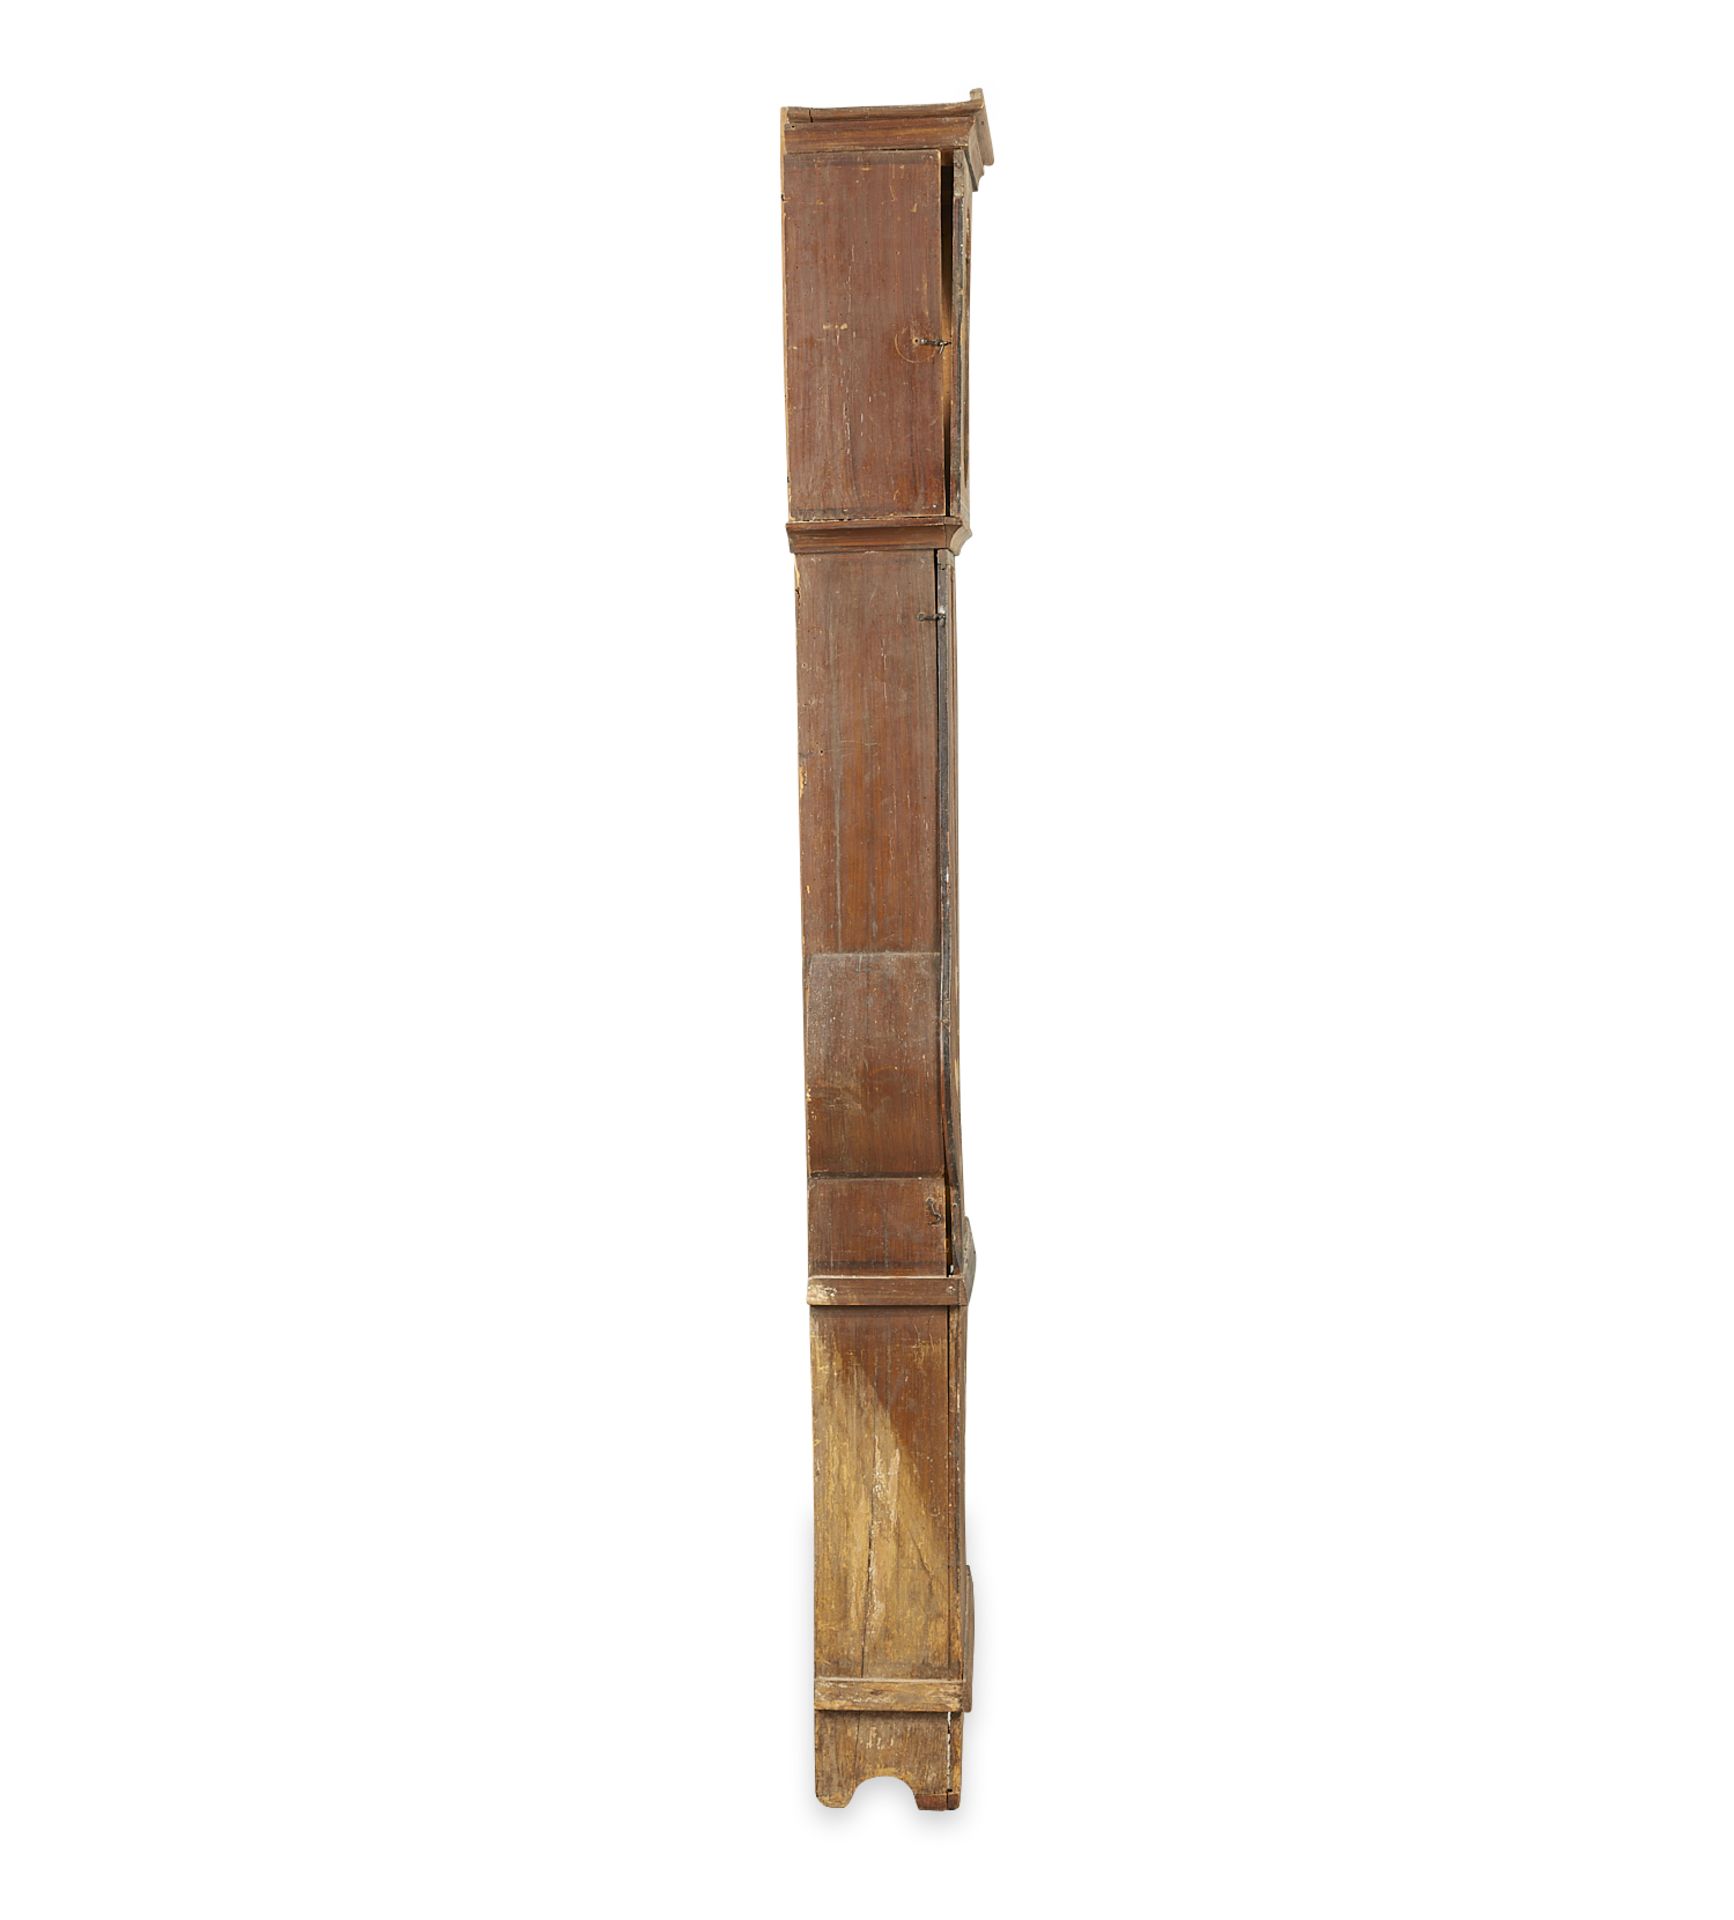 Delarue French Country Painted Grandfather Clock - Image 6 of 22